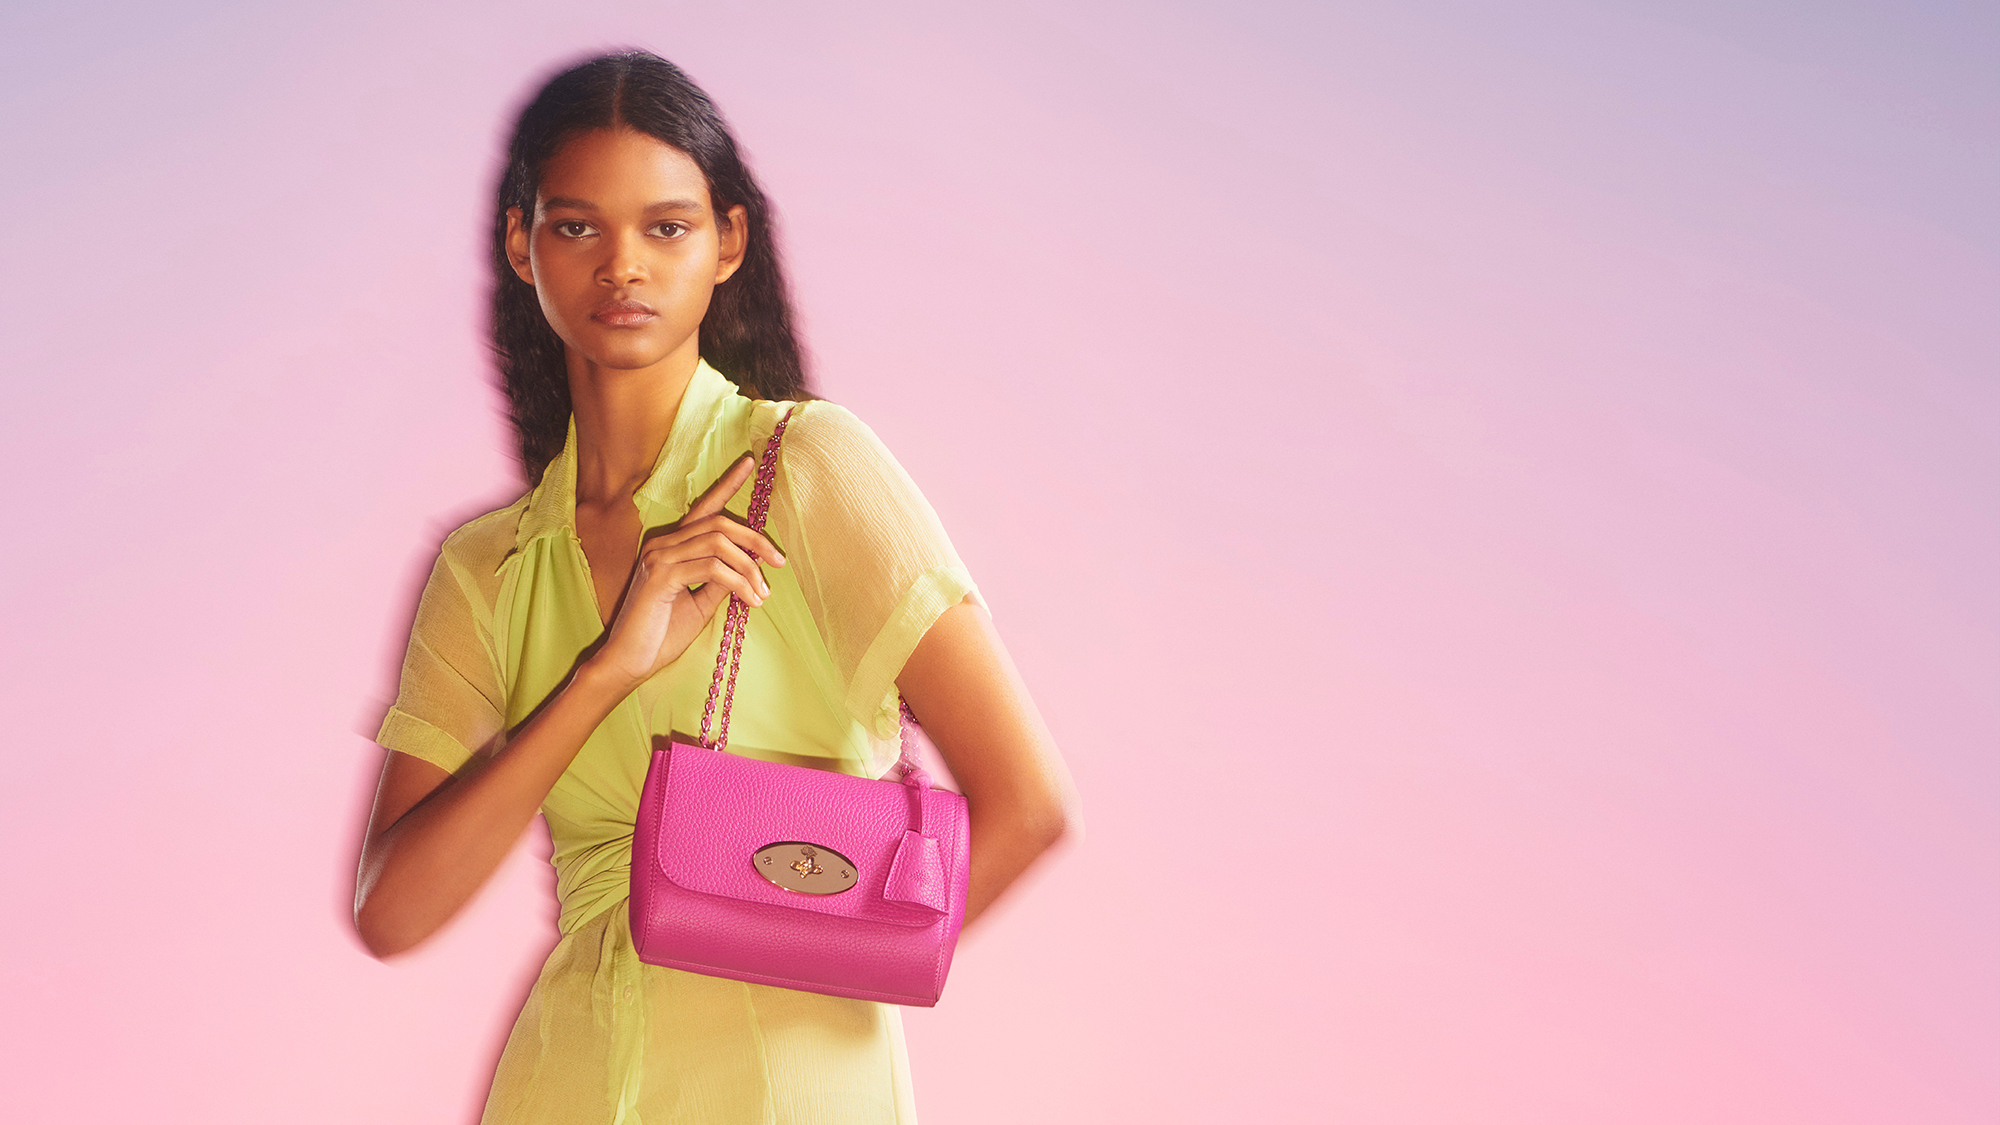 Mulberry has launched its first ever carbon neutral bag